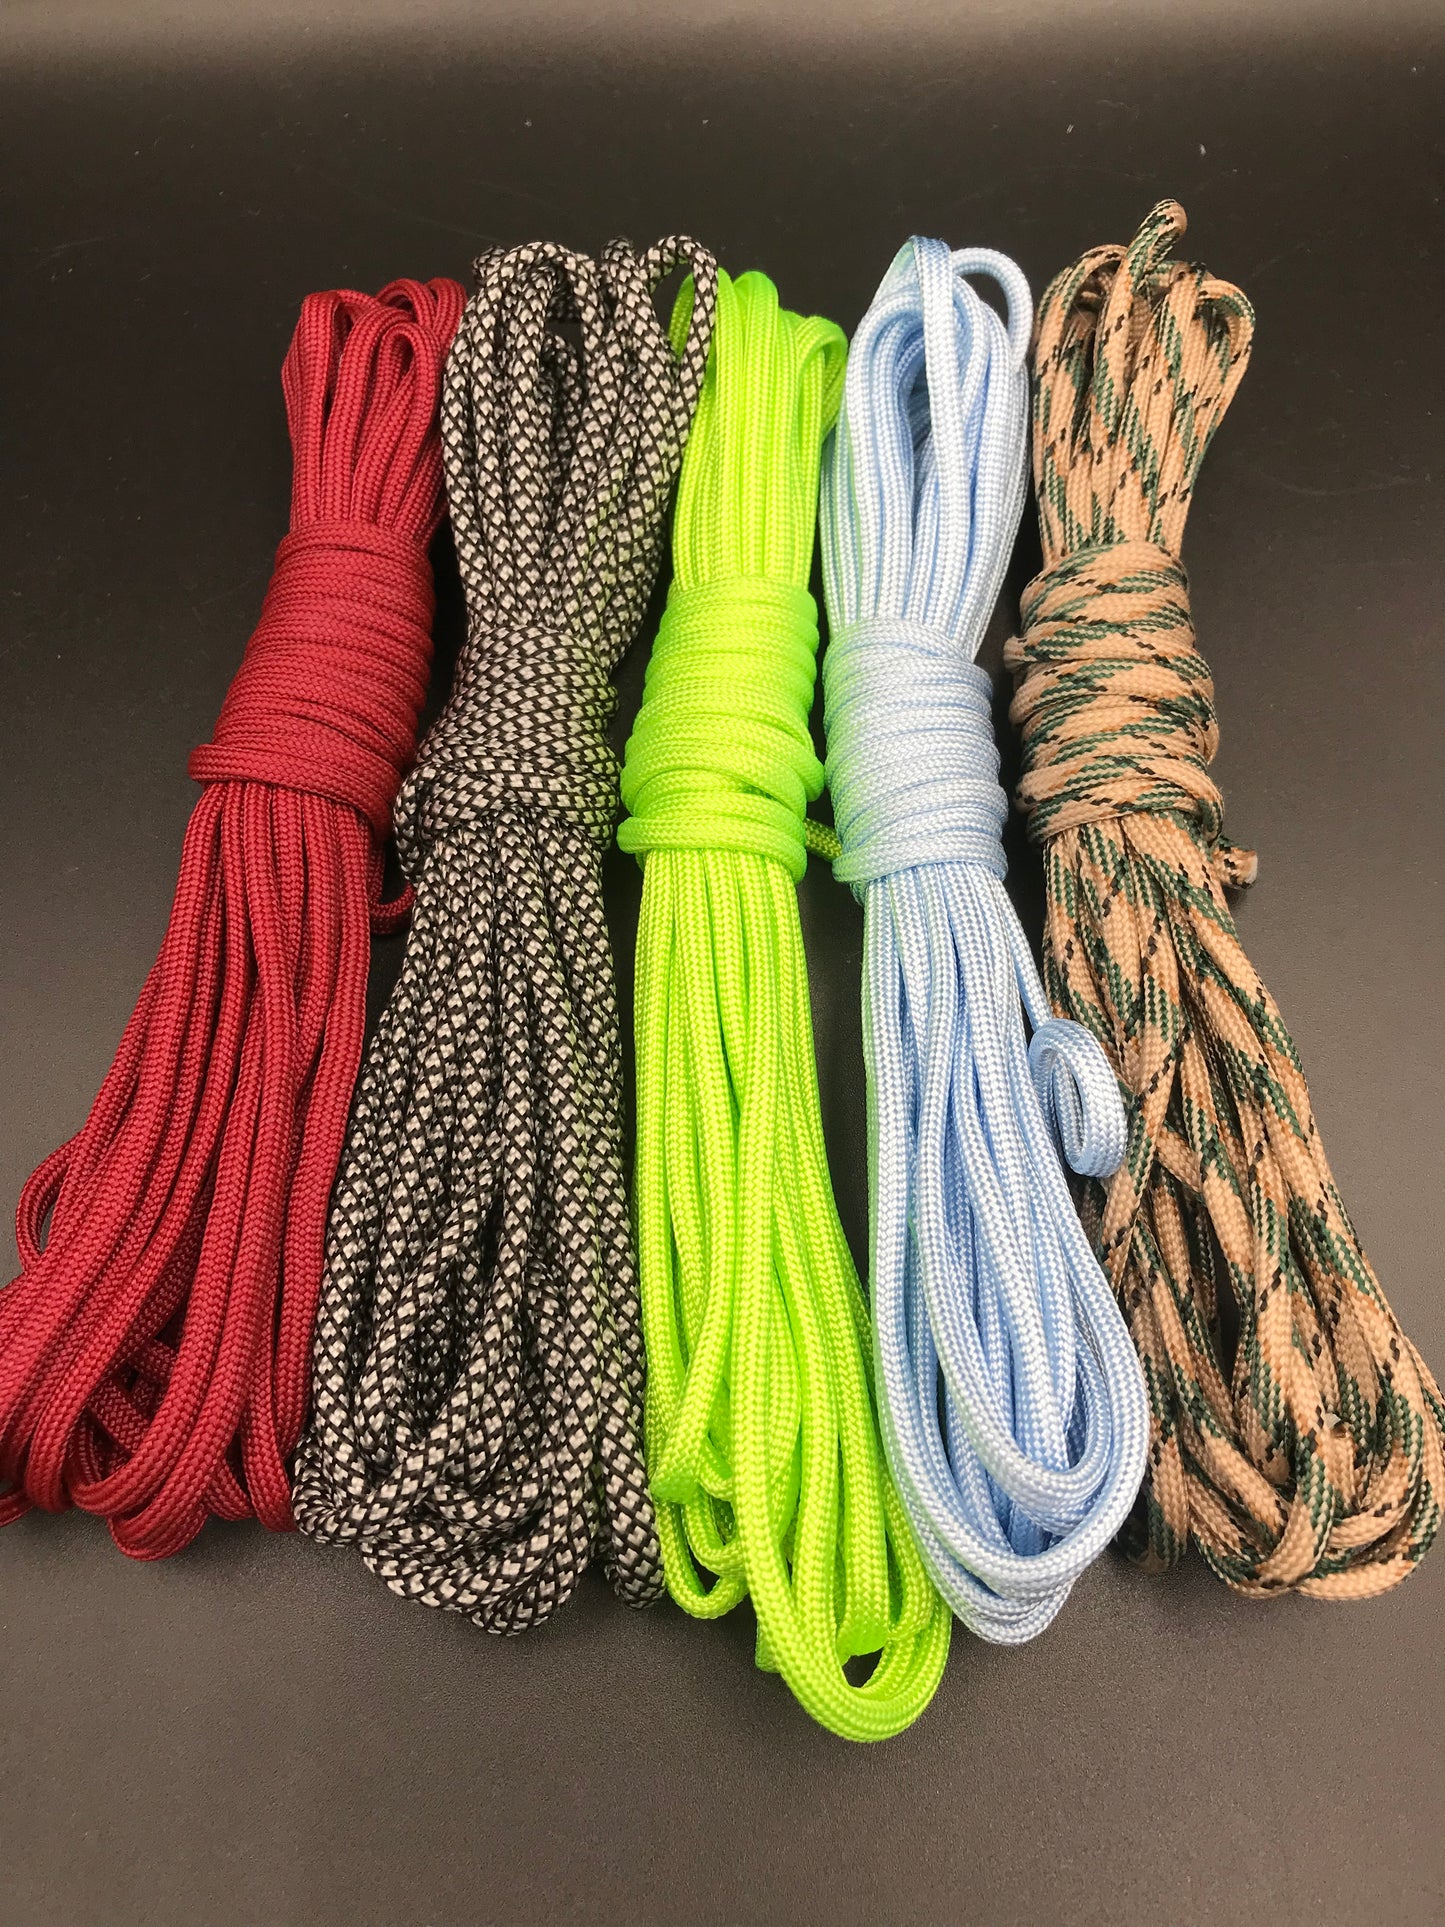 Paracord starter pack in a colour variety of 5 x 20ft bundles ( burgandy wine, silver diamond, neon Green, lilac and dark  desert camo